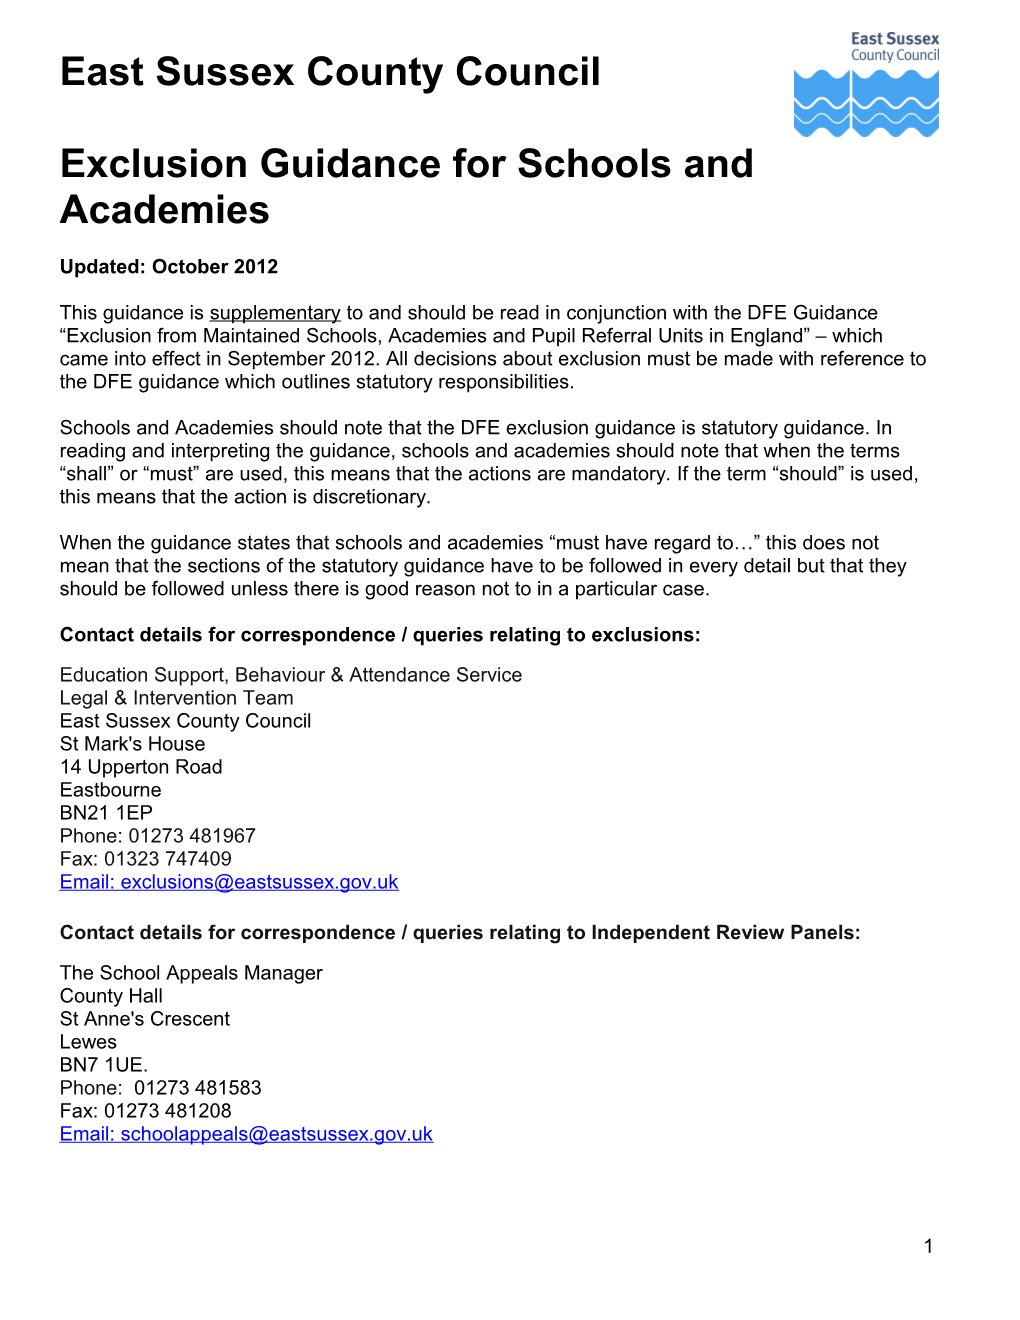 Exclusion Guidance for Schools and Academies